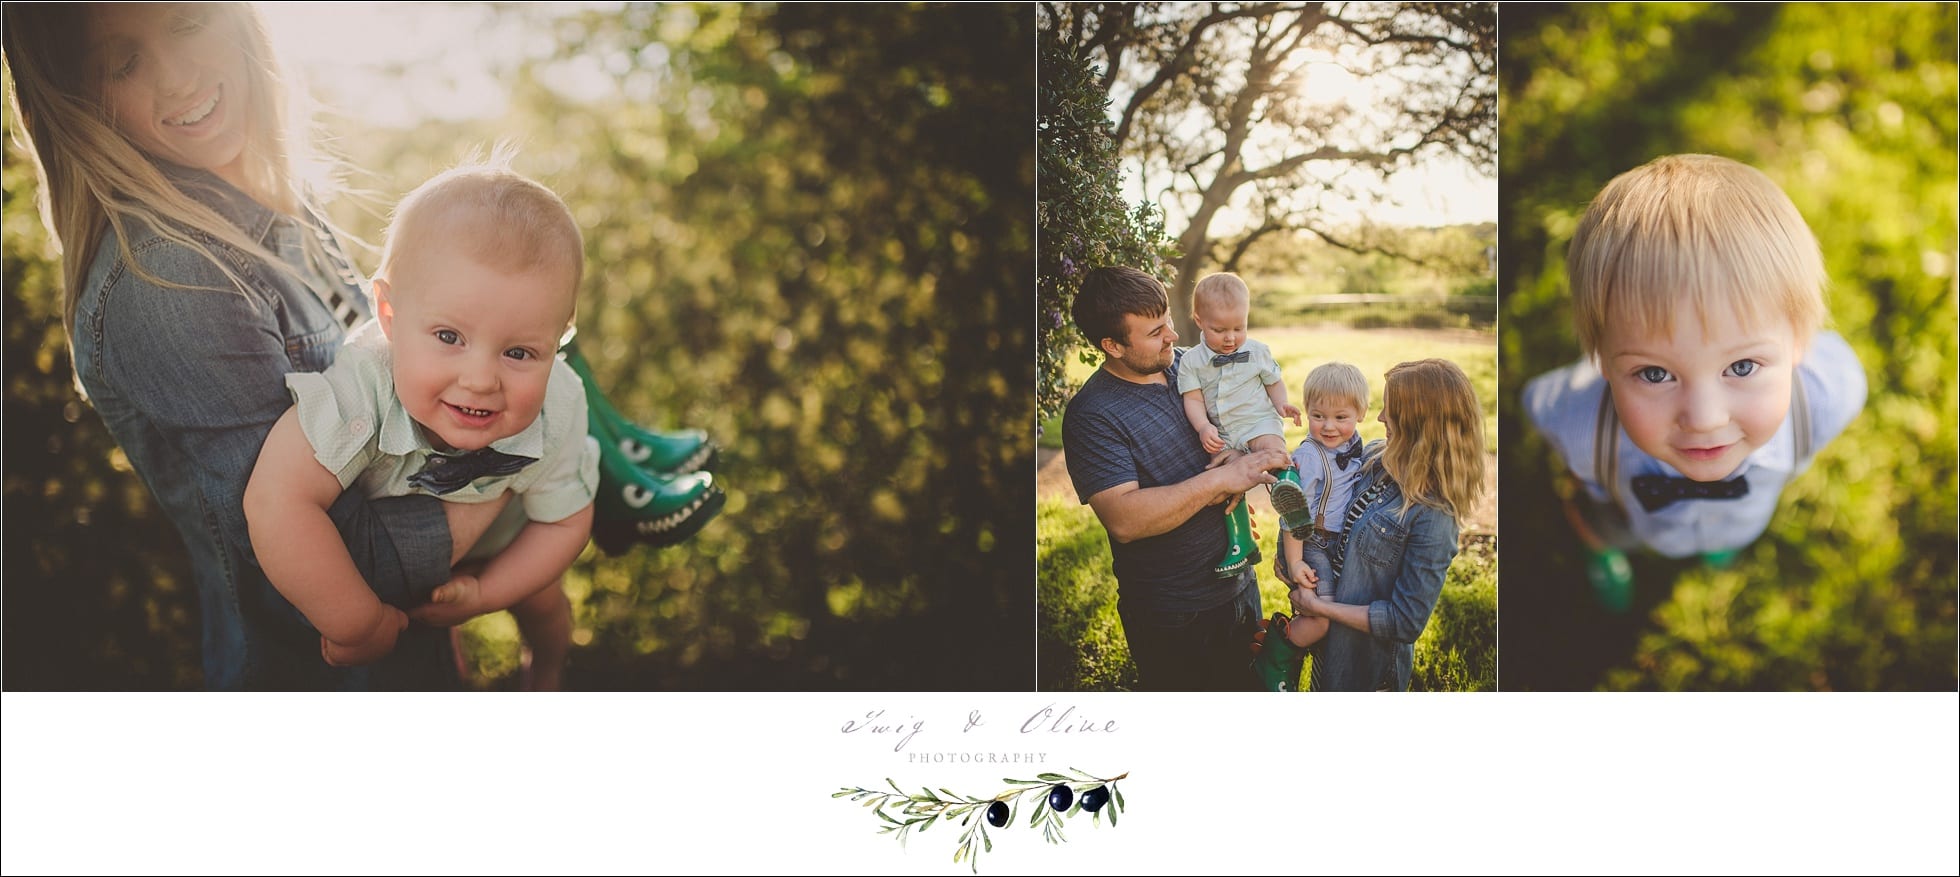 Family session Austin Texas, siblings, parents, happy children